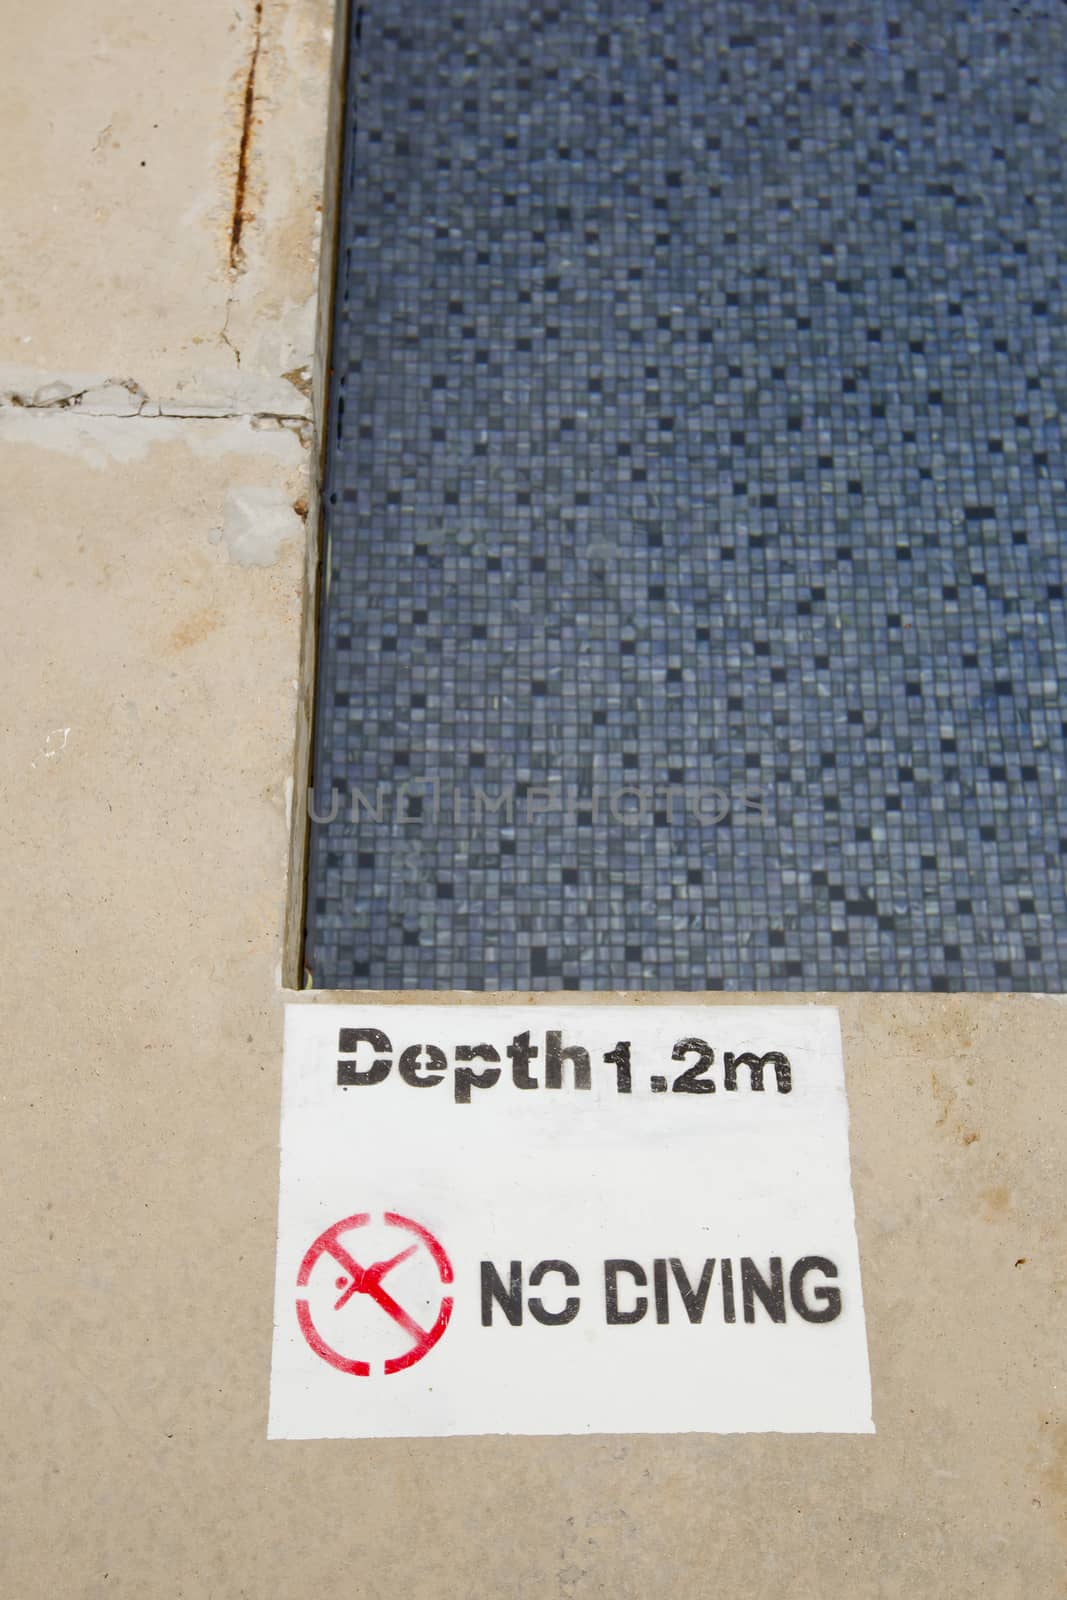 No diving and jumping sign